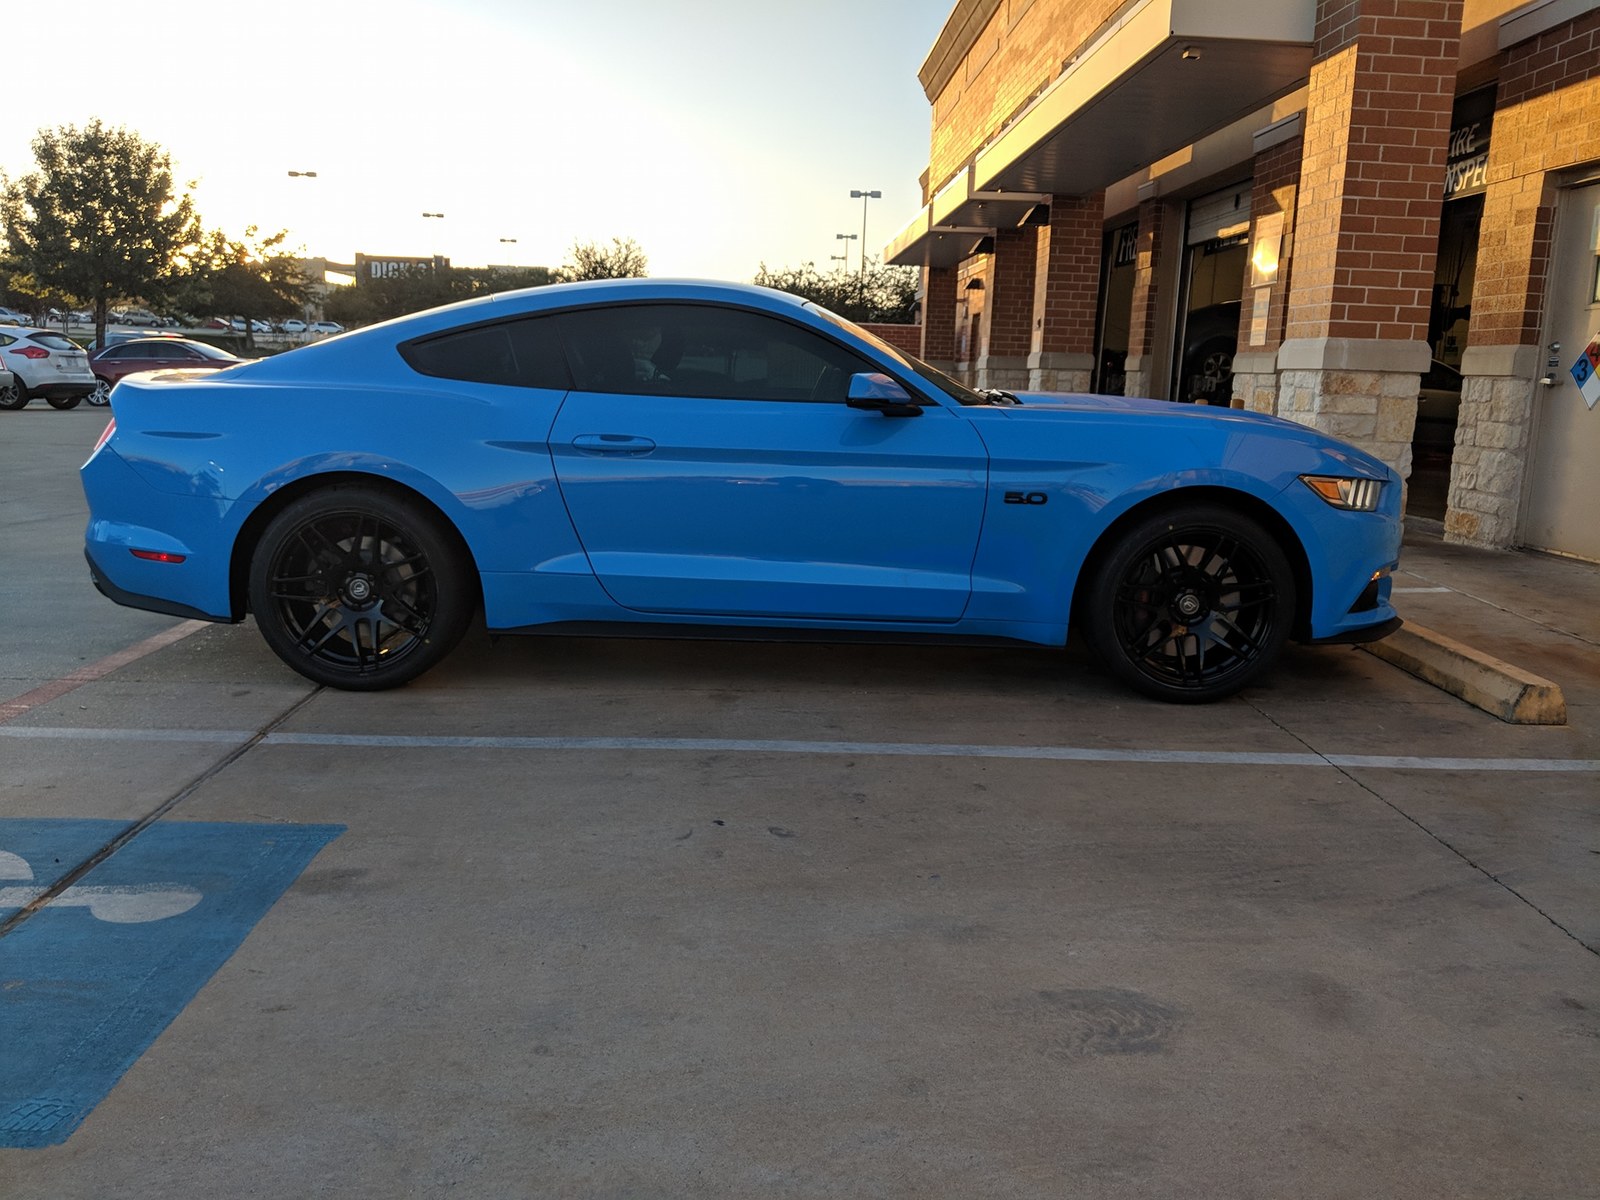 ber-blue-ford-mustang-gtpp-s550-forgestar-f14-semi-gloss-black-rotory-forged-concave-mesh-wheels.jpg